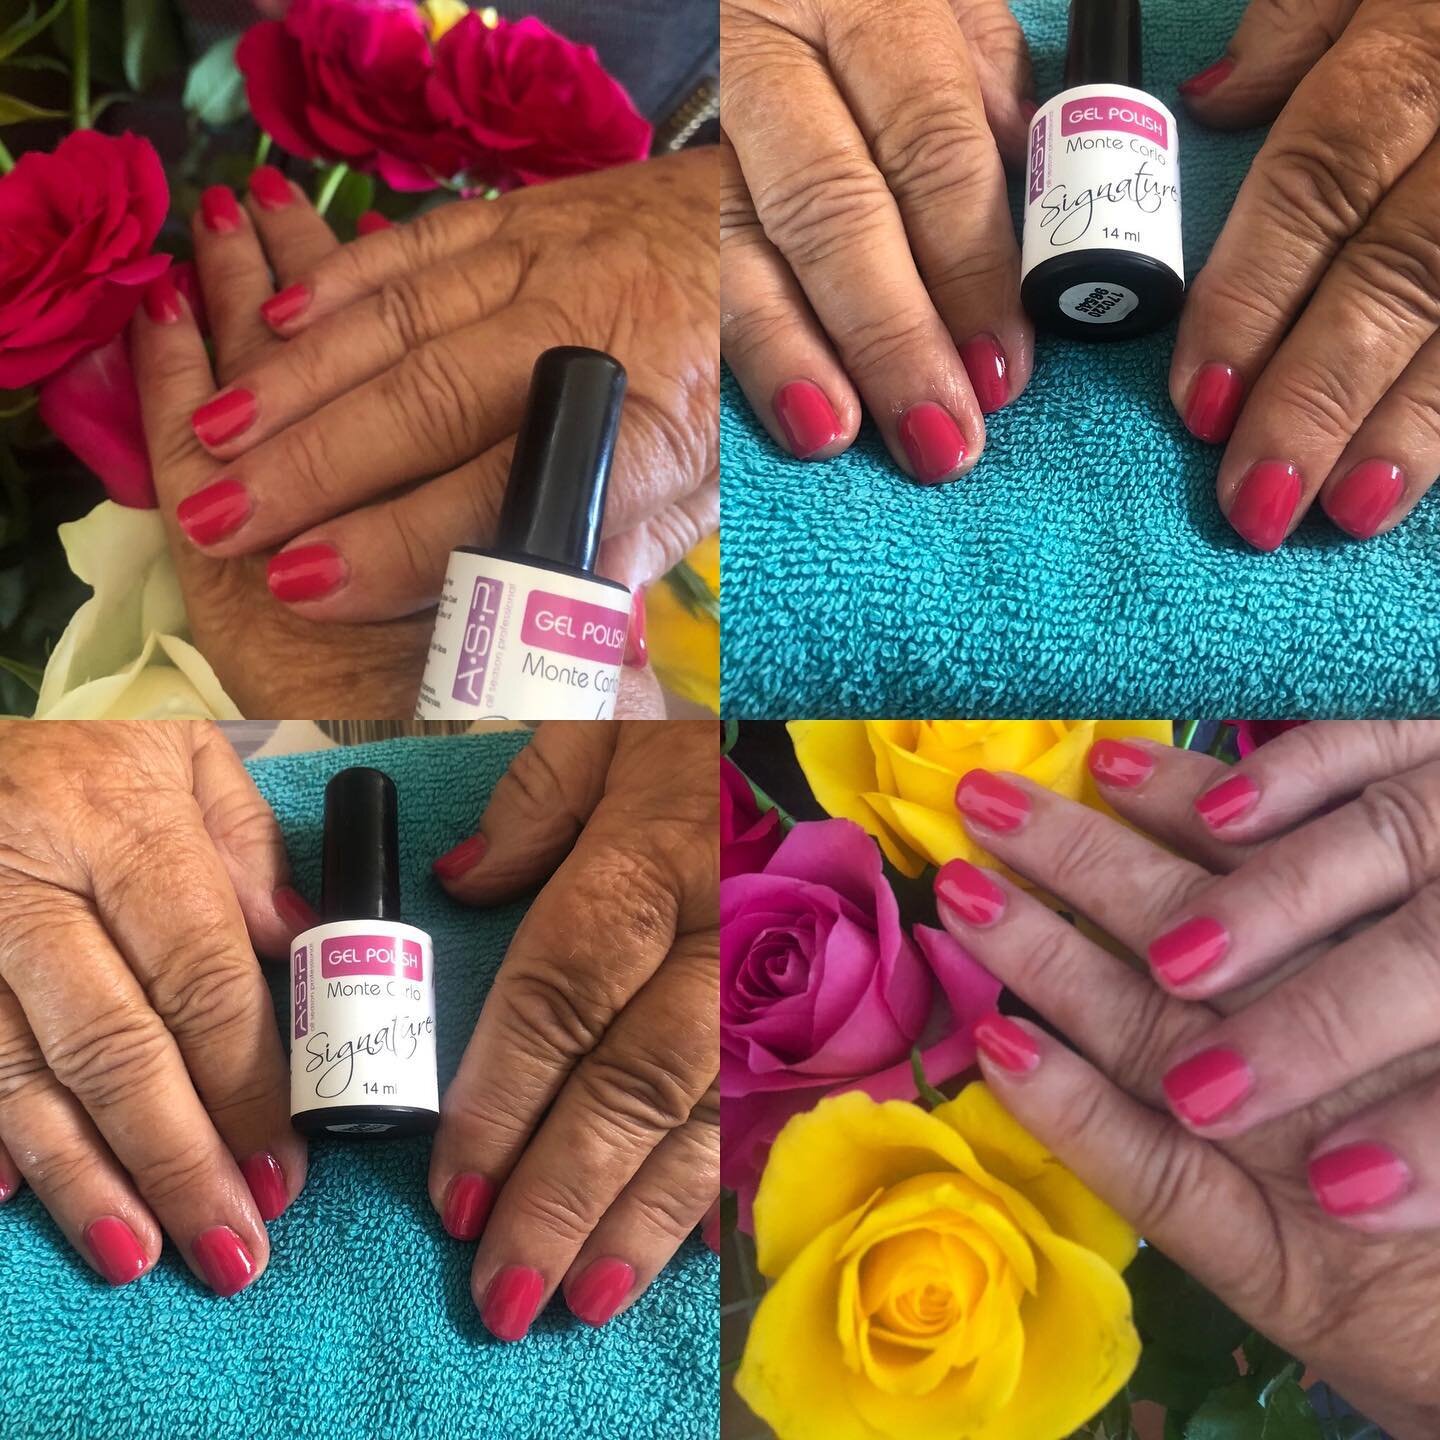 A little bit of &ldquo;Monte Carlo&rdquo; on these nails ready for the summer weather .... by Signature ASP gel polish. #mani#gelnails#aspgelpolish#aspsignature#pink#pinknails#montecarlo#mobilenails#staysafe#ppe#barbicidecertifiedcovid19